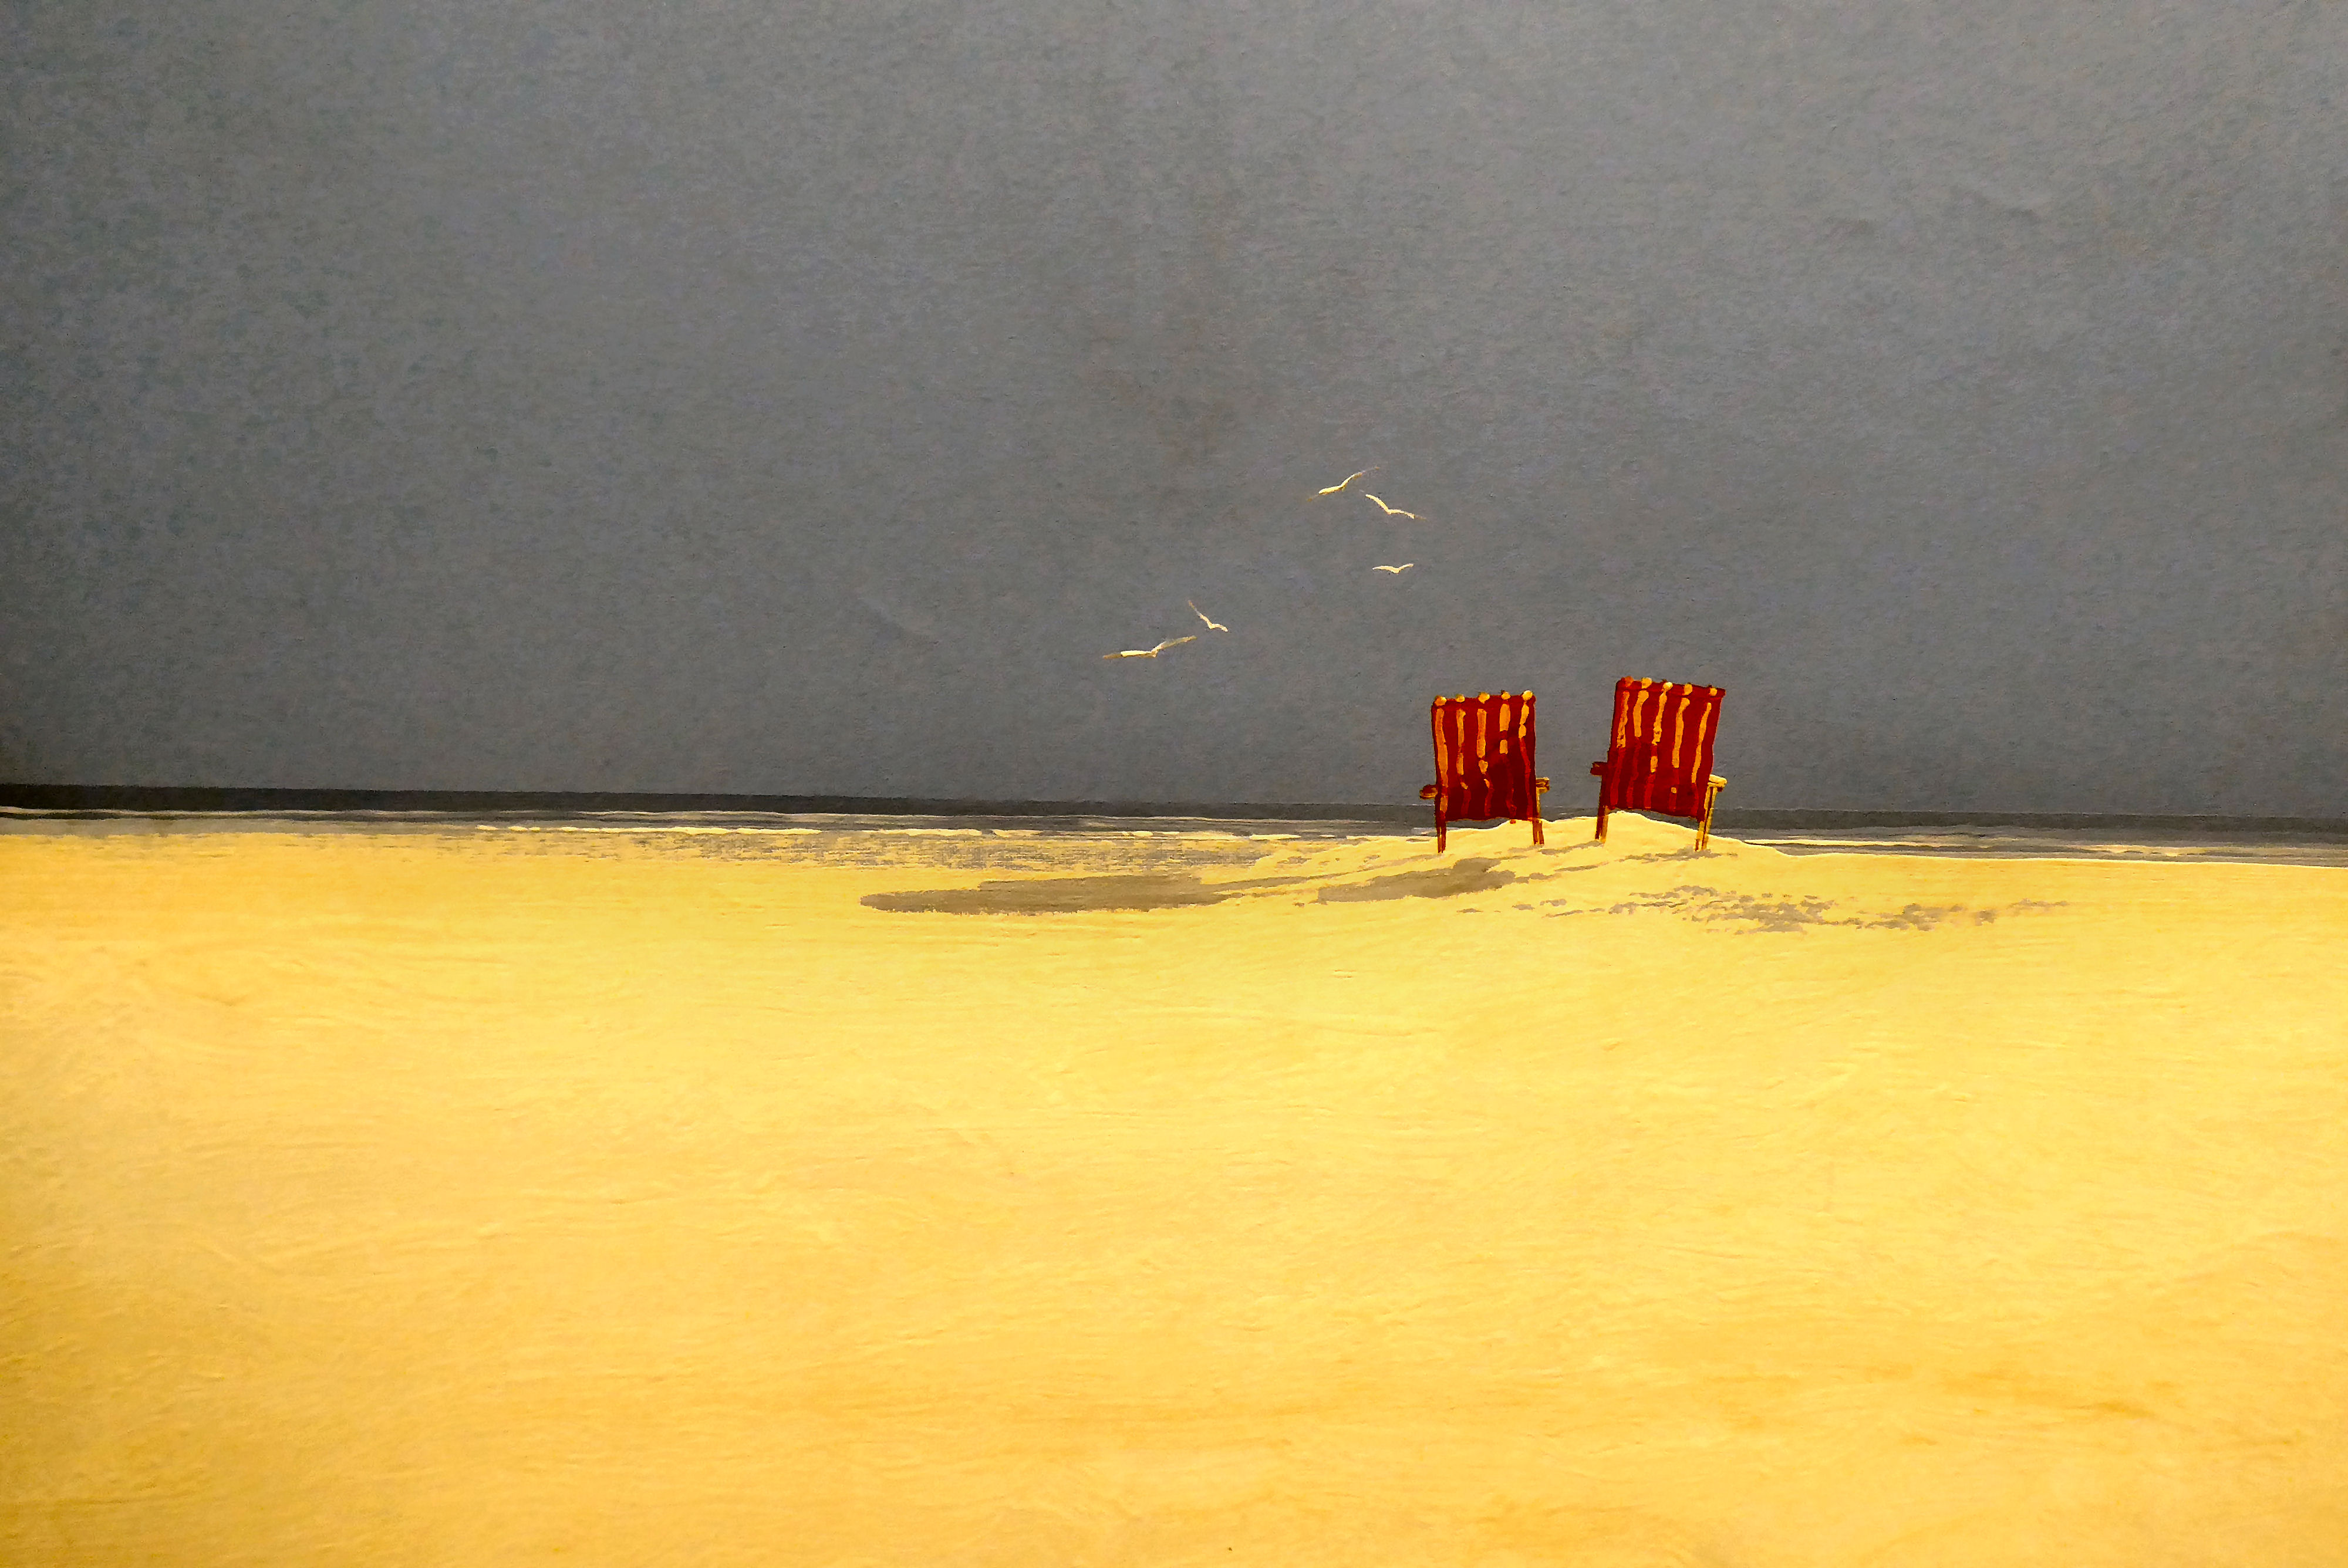 John Horsewell - a study of two deckchairs and gulls, on a deserted seashore  acrylic on canvas - Image 2 of 4